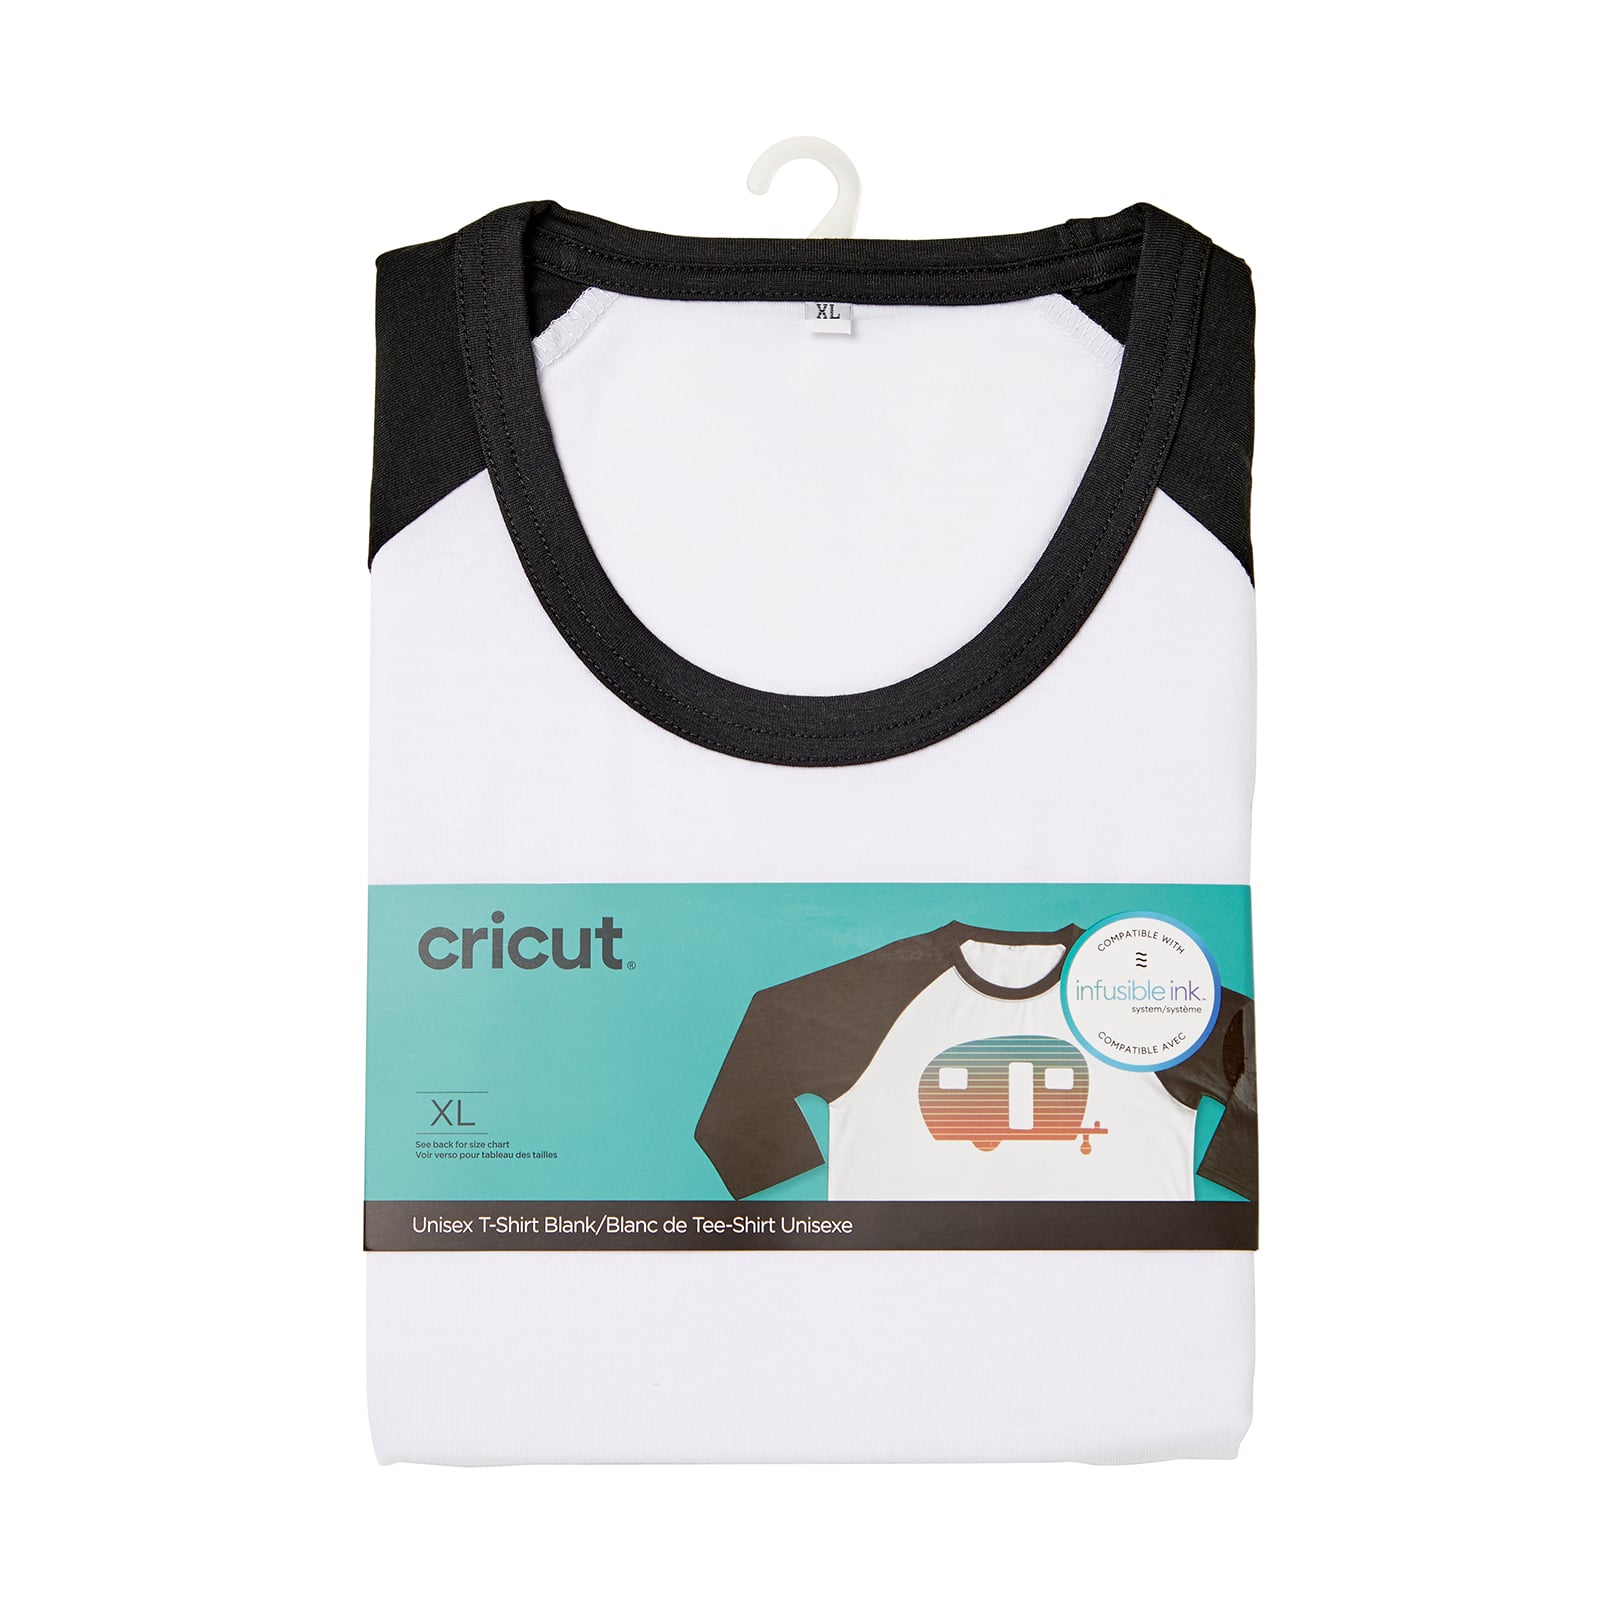 Make Matching Family Shirts with Cricut Infusible Ink Raglans